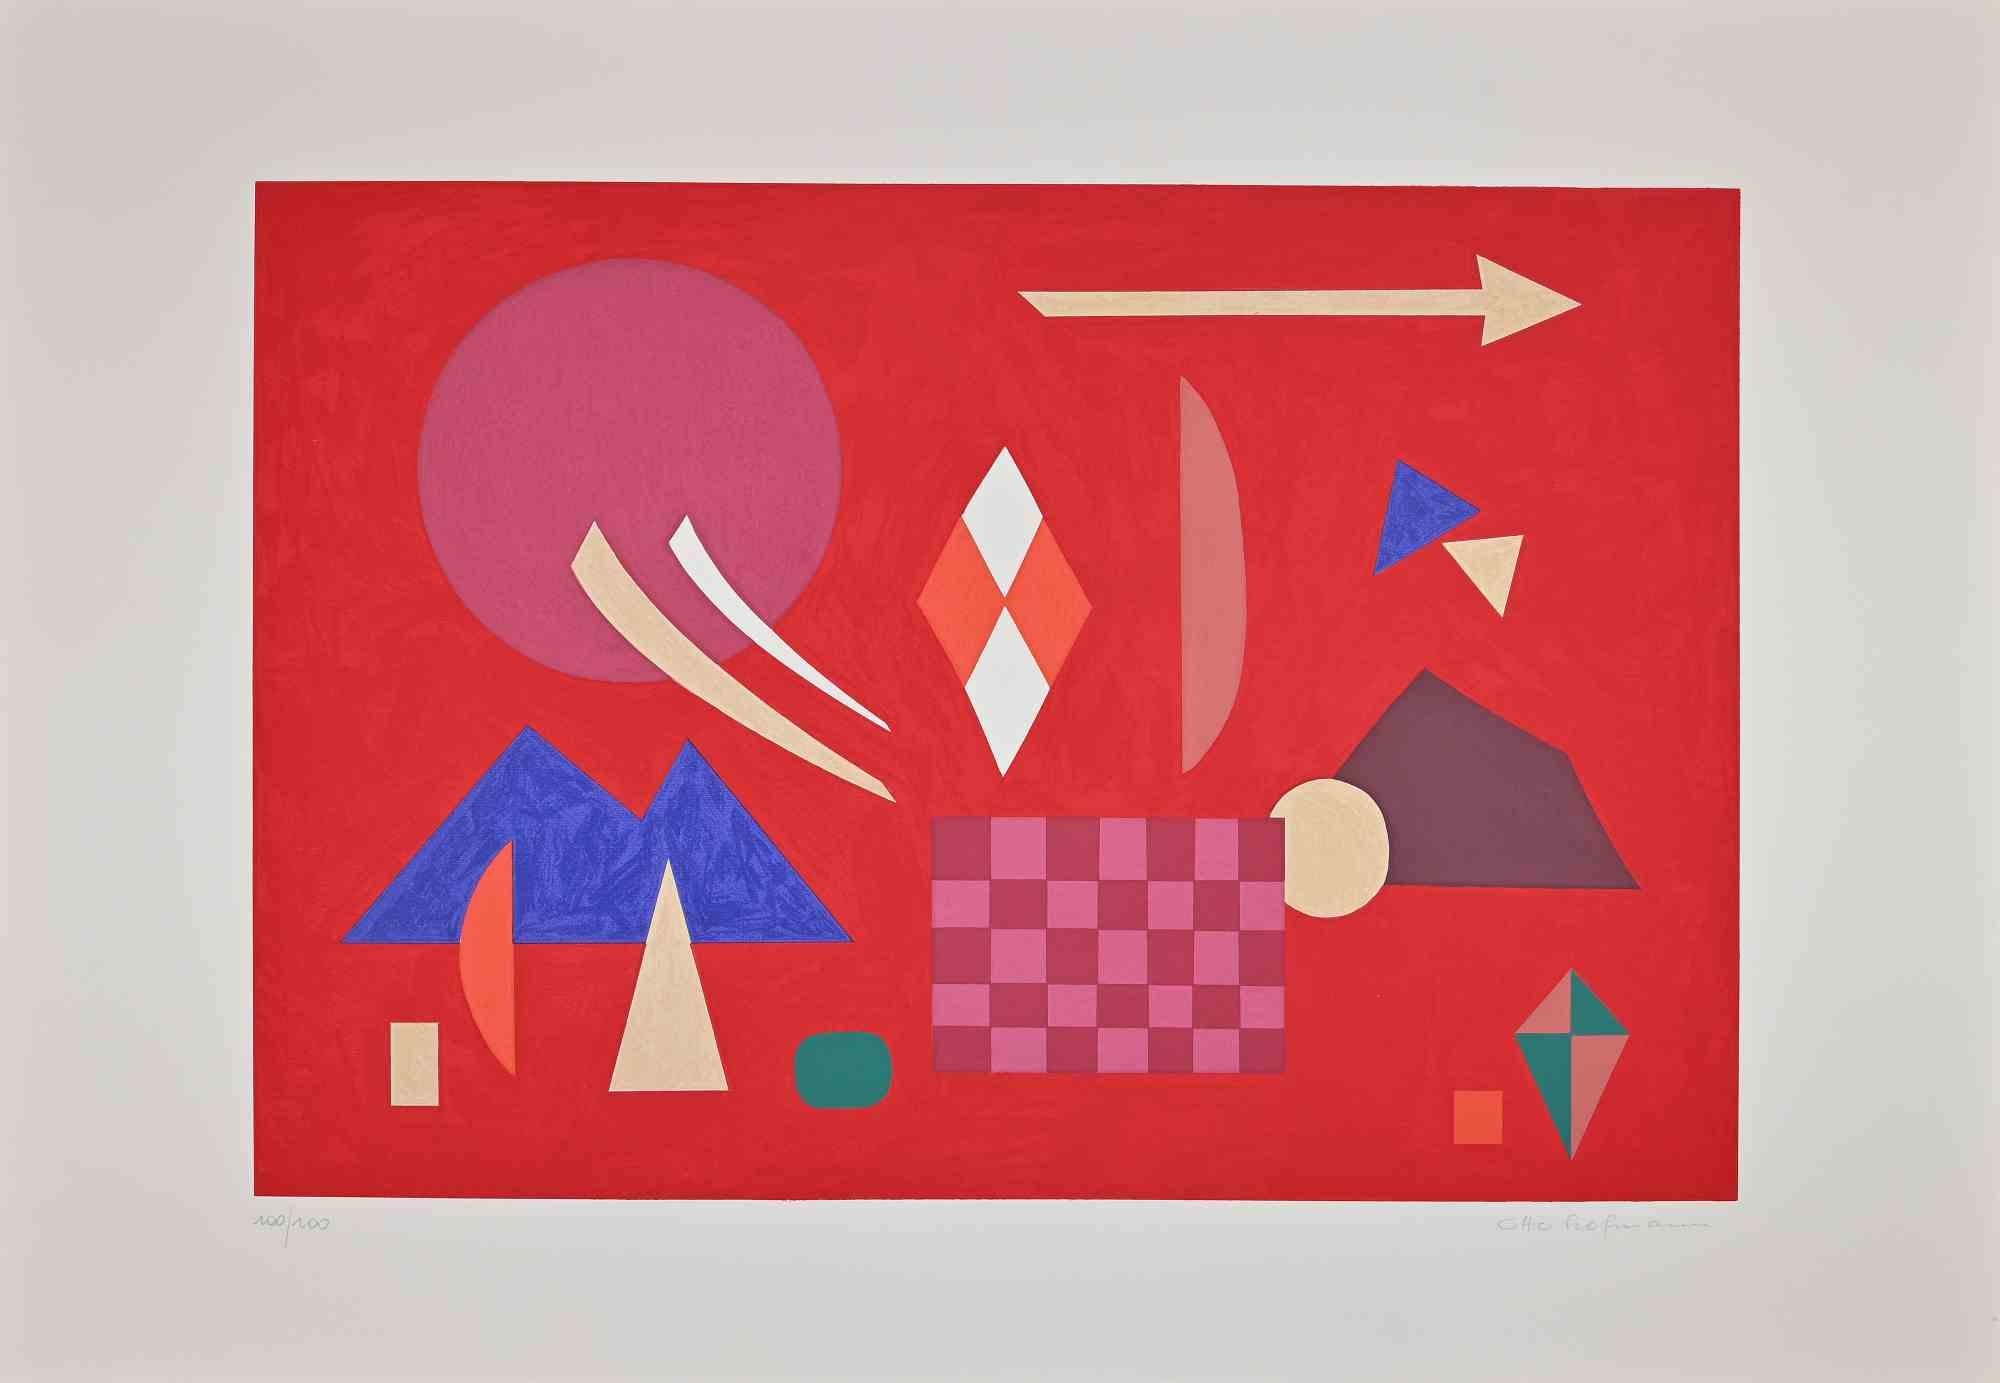 Red composition is an original contemporary artwork realizedby Otto Hofmann in 1989.

Mixed colored screen print.

Hand signed on the lower right margin.

Numbered on the lower left. Edition of 100/100.

The artwork is from a potfolio edited by